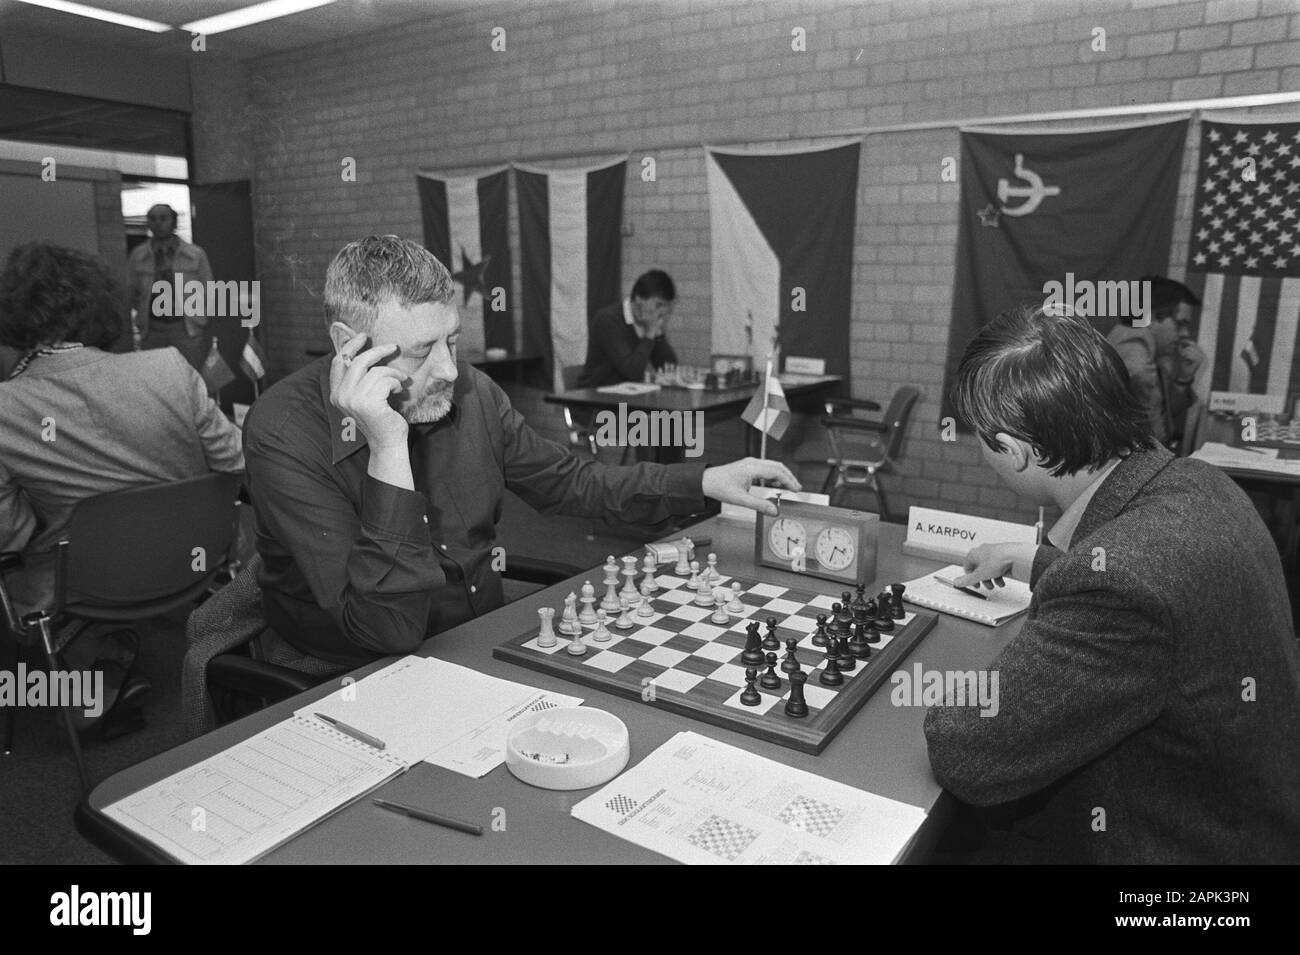 Third round IBM chess tournament at A'dam, 5a and 6a Jan Hein Donner (l) against Karpov (r), 7a and 8a Jan Timman against Smyslov Date: 18 May 1981 Location: Amsterdam, Noord-Holland Keywords: chess Personal name: Donner, Jan Hein, Karpov, Anatoli, Timman, Jan Institution name: IBM-Chess Tournament Stock Photo